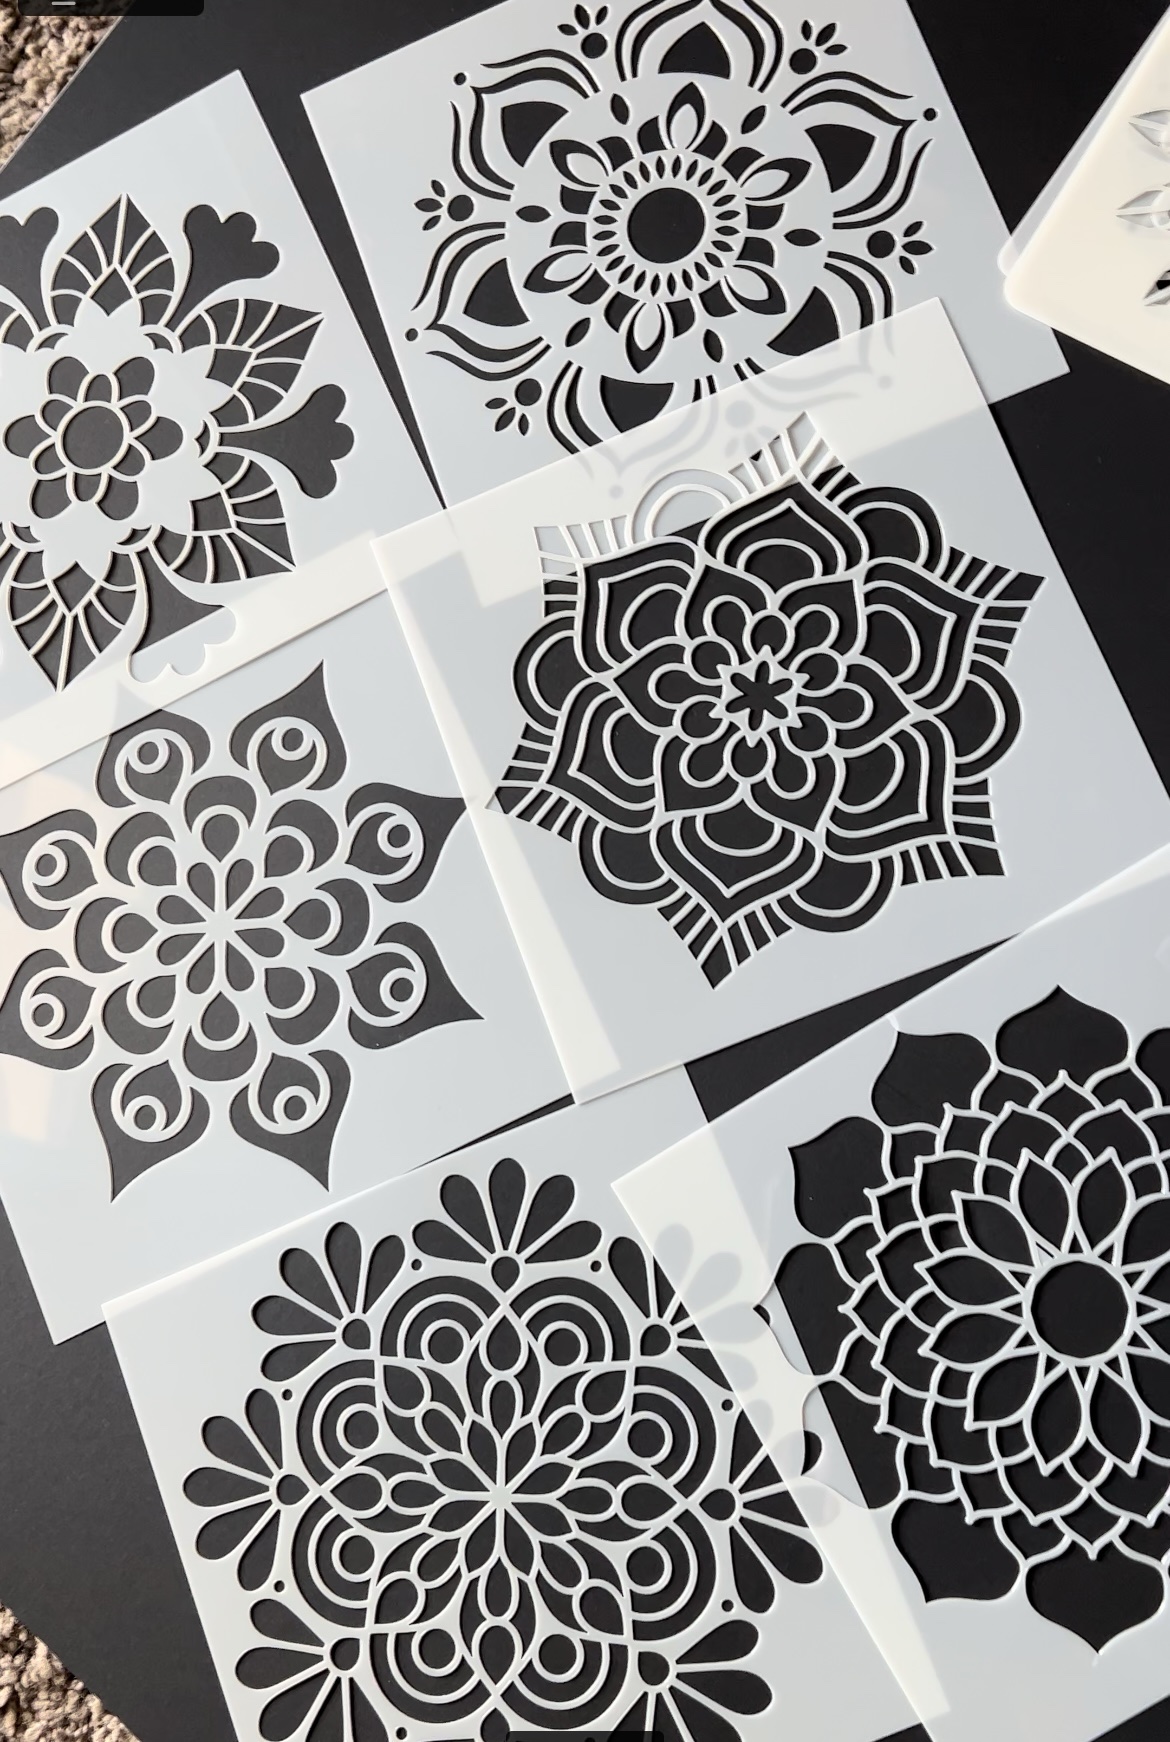 16 Pack Mandala Stencils for Dot Painting, 6 X 6 Inch Reusable Mandala  Stencils for Painting, DIY Decorative Lotus Stencil Template